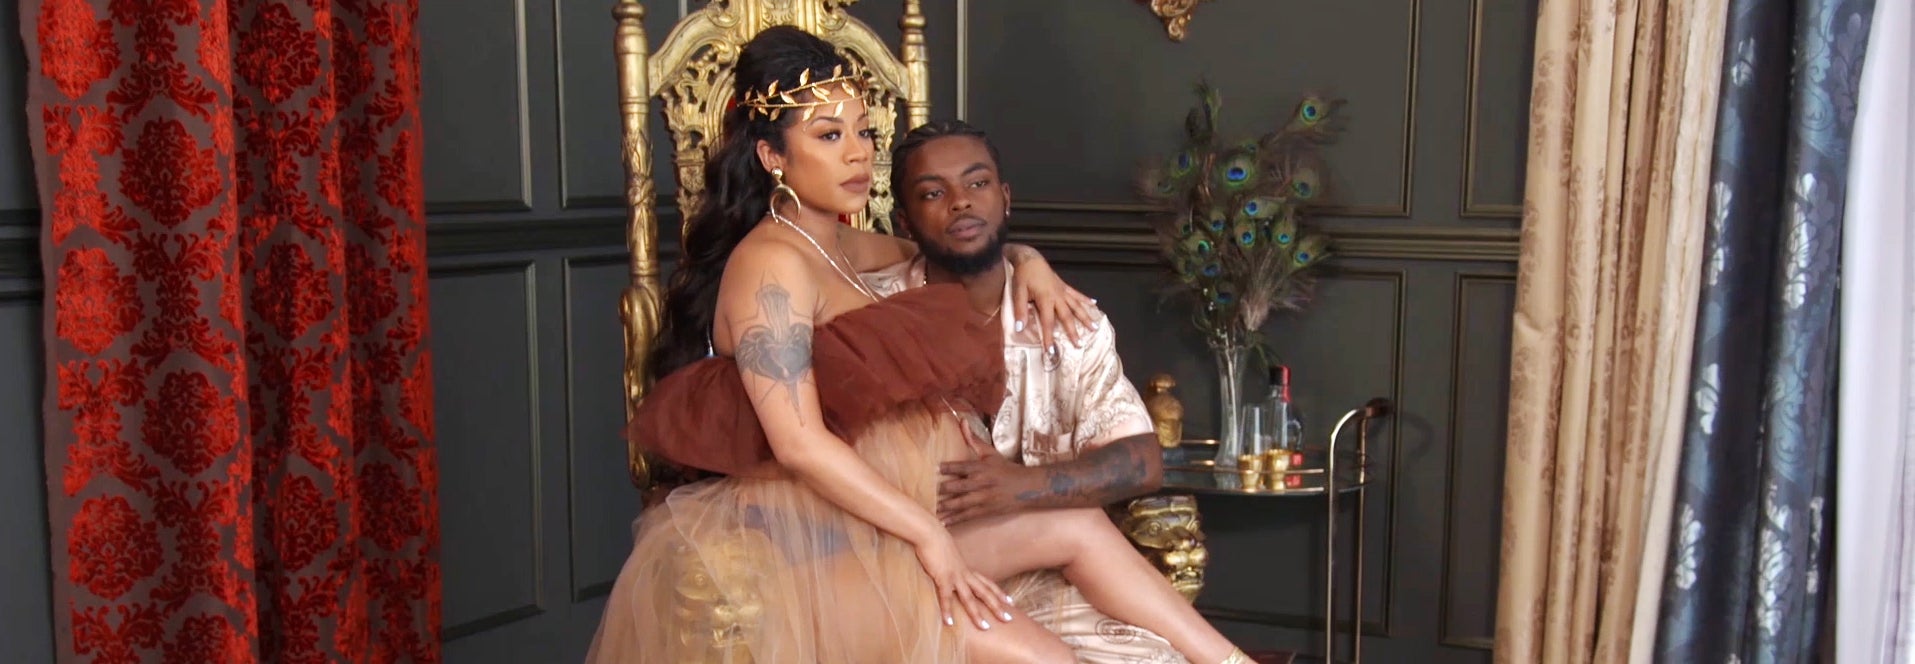 Watch This Exclusive Sneak Peek For Keyshia Cole's 'My New Life' Baby Special On BET